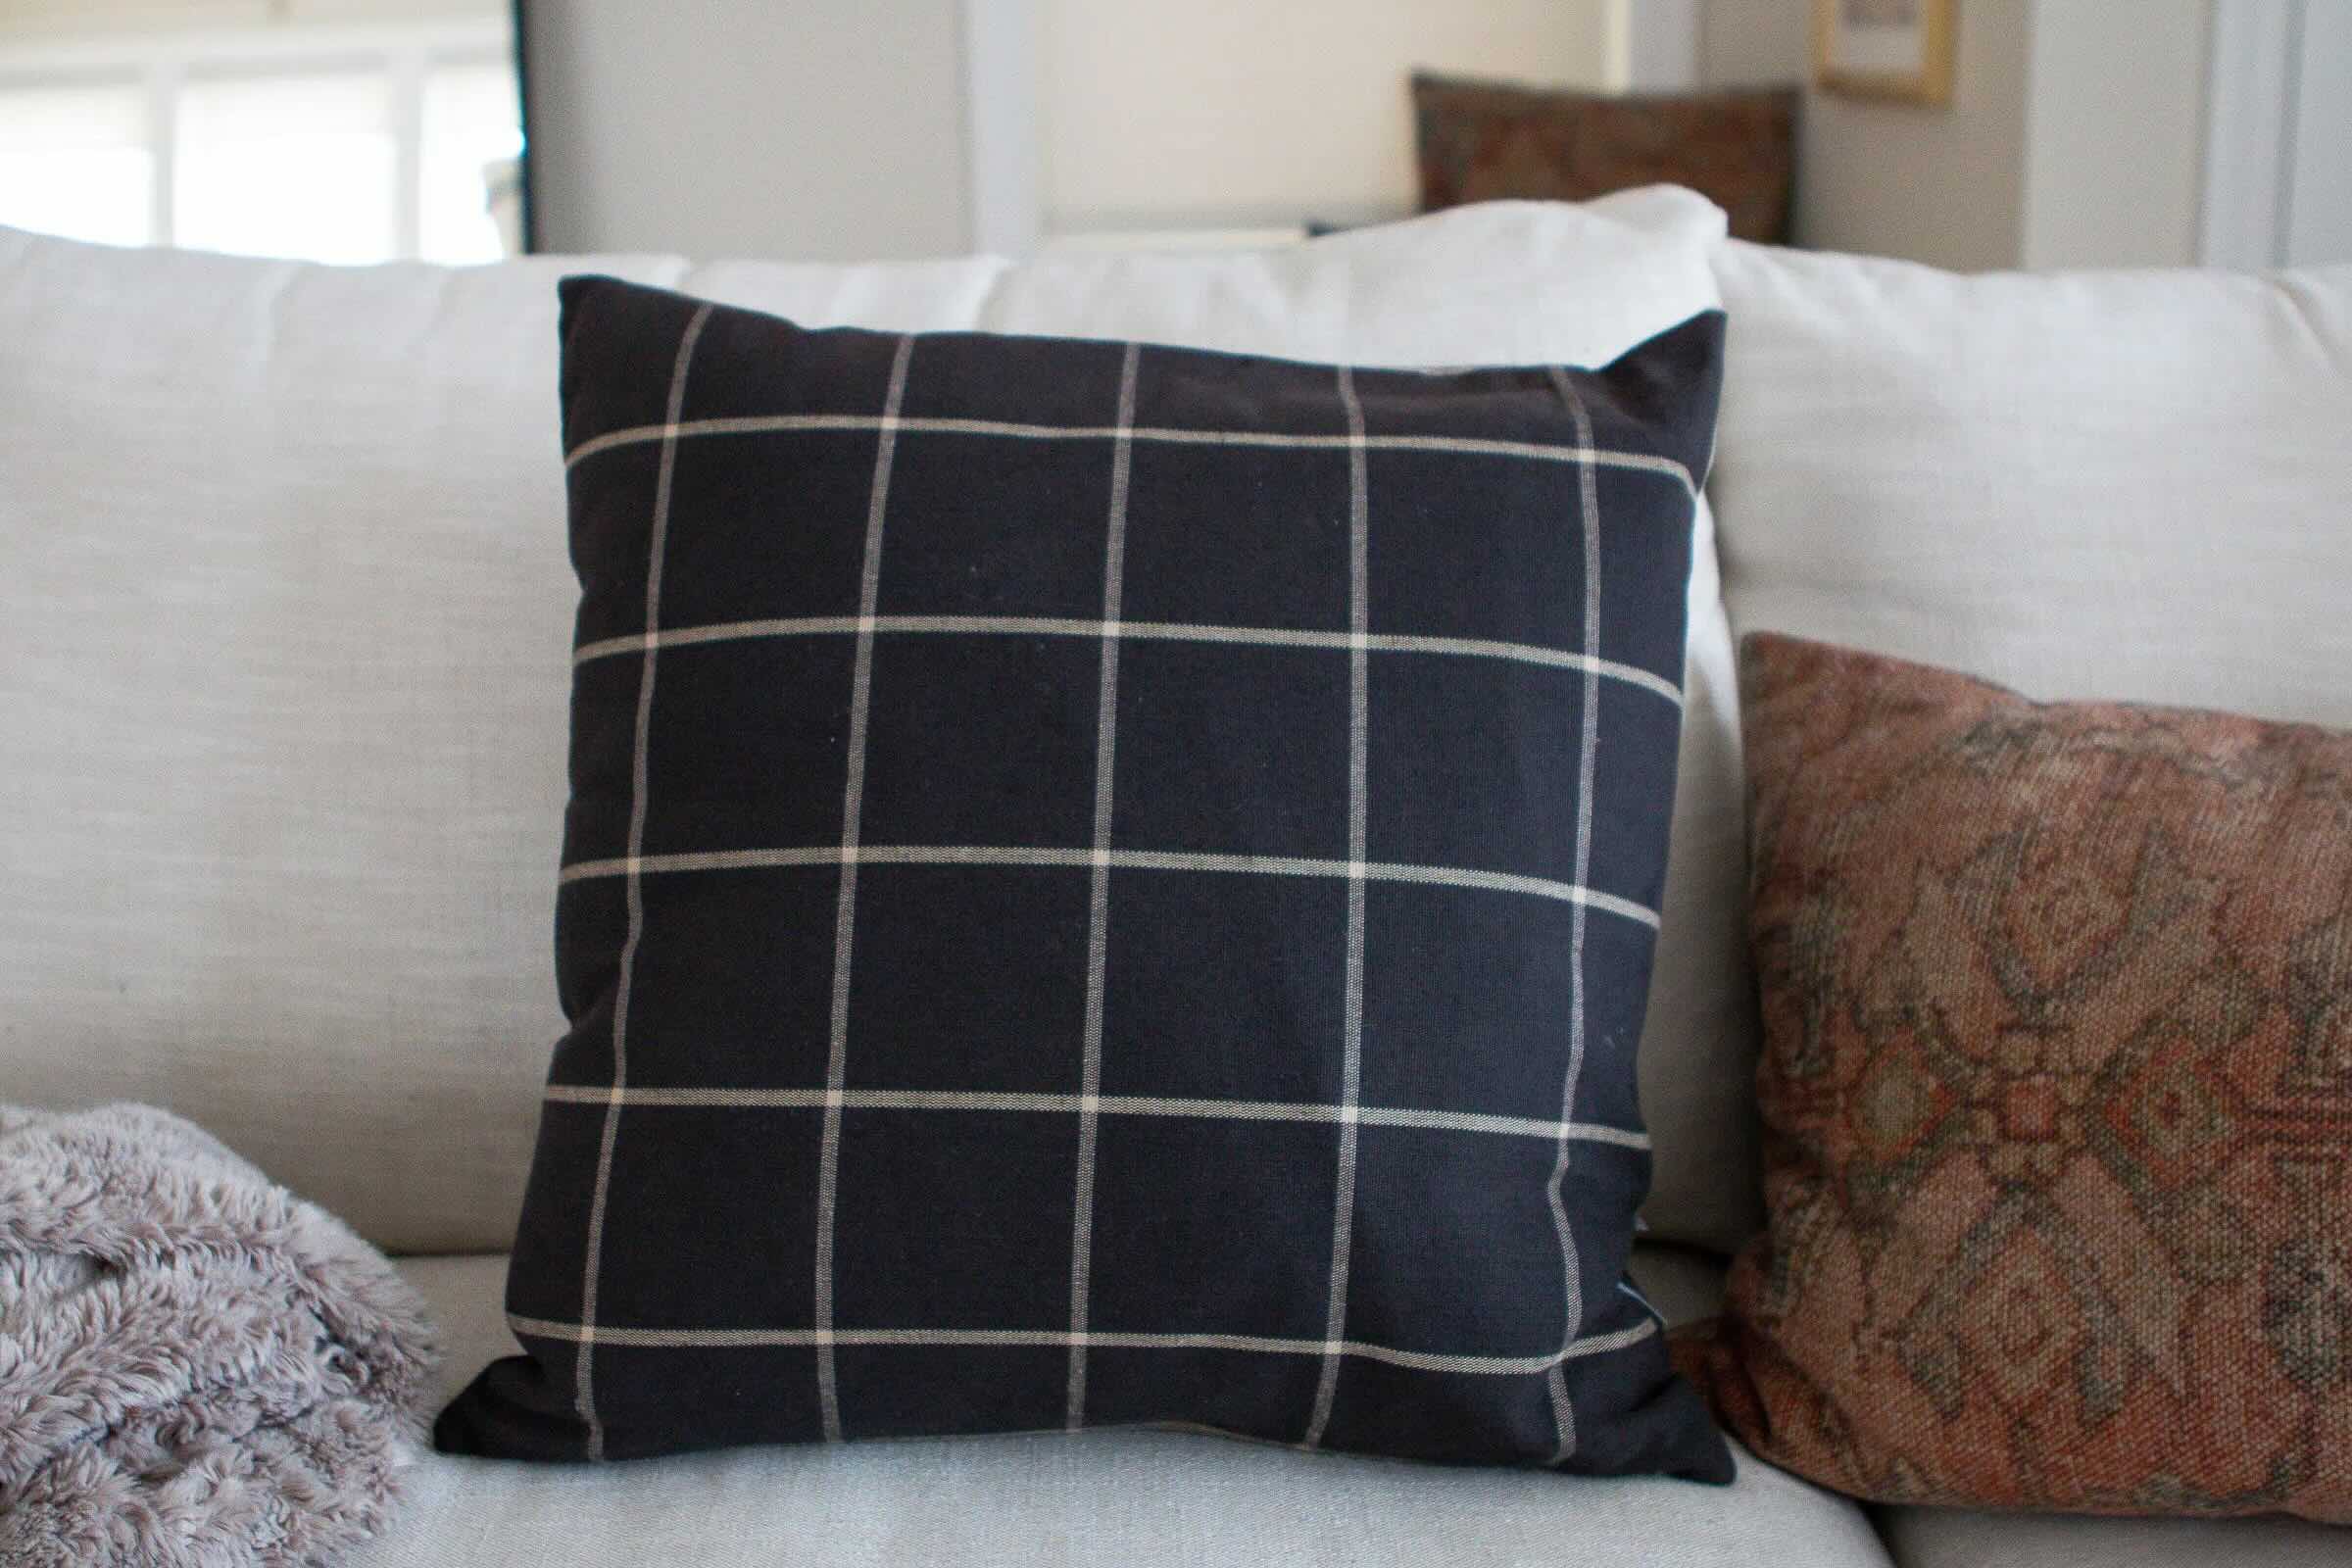 How to clean throw pillows: experts offer laundry lessons